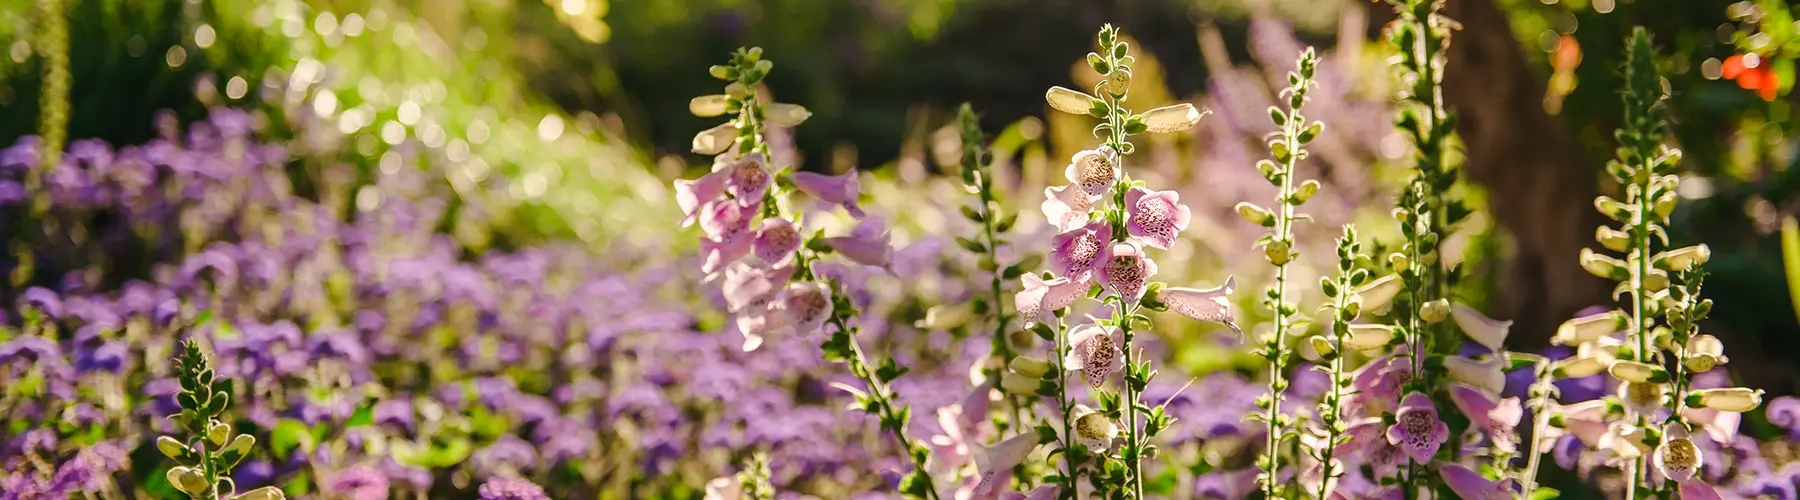 A field of pink/purple flowers on a sunny day stand in front of a blurred background of similar purples/pinks and greenery. 